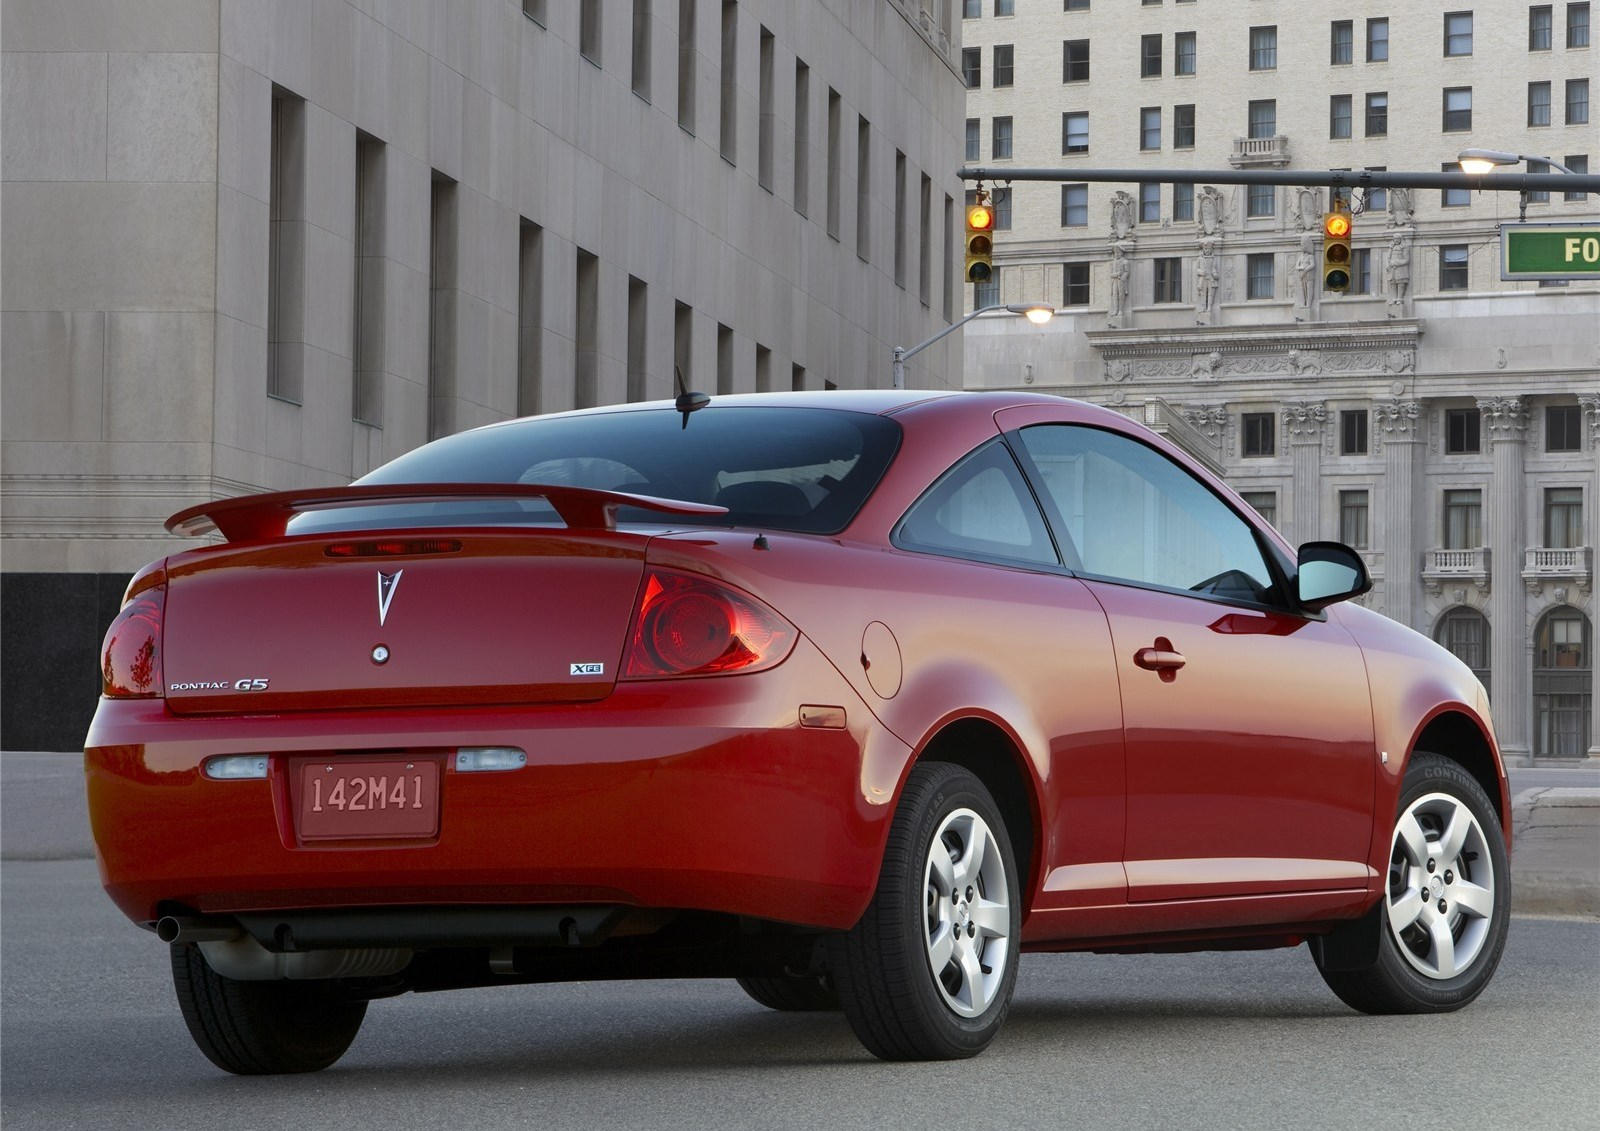 2009 Pontiac G5 Review, Pricing, & Pictures